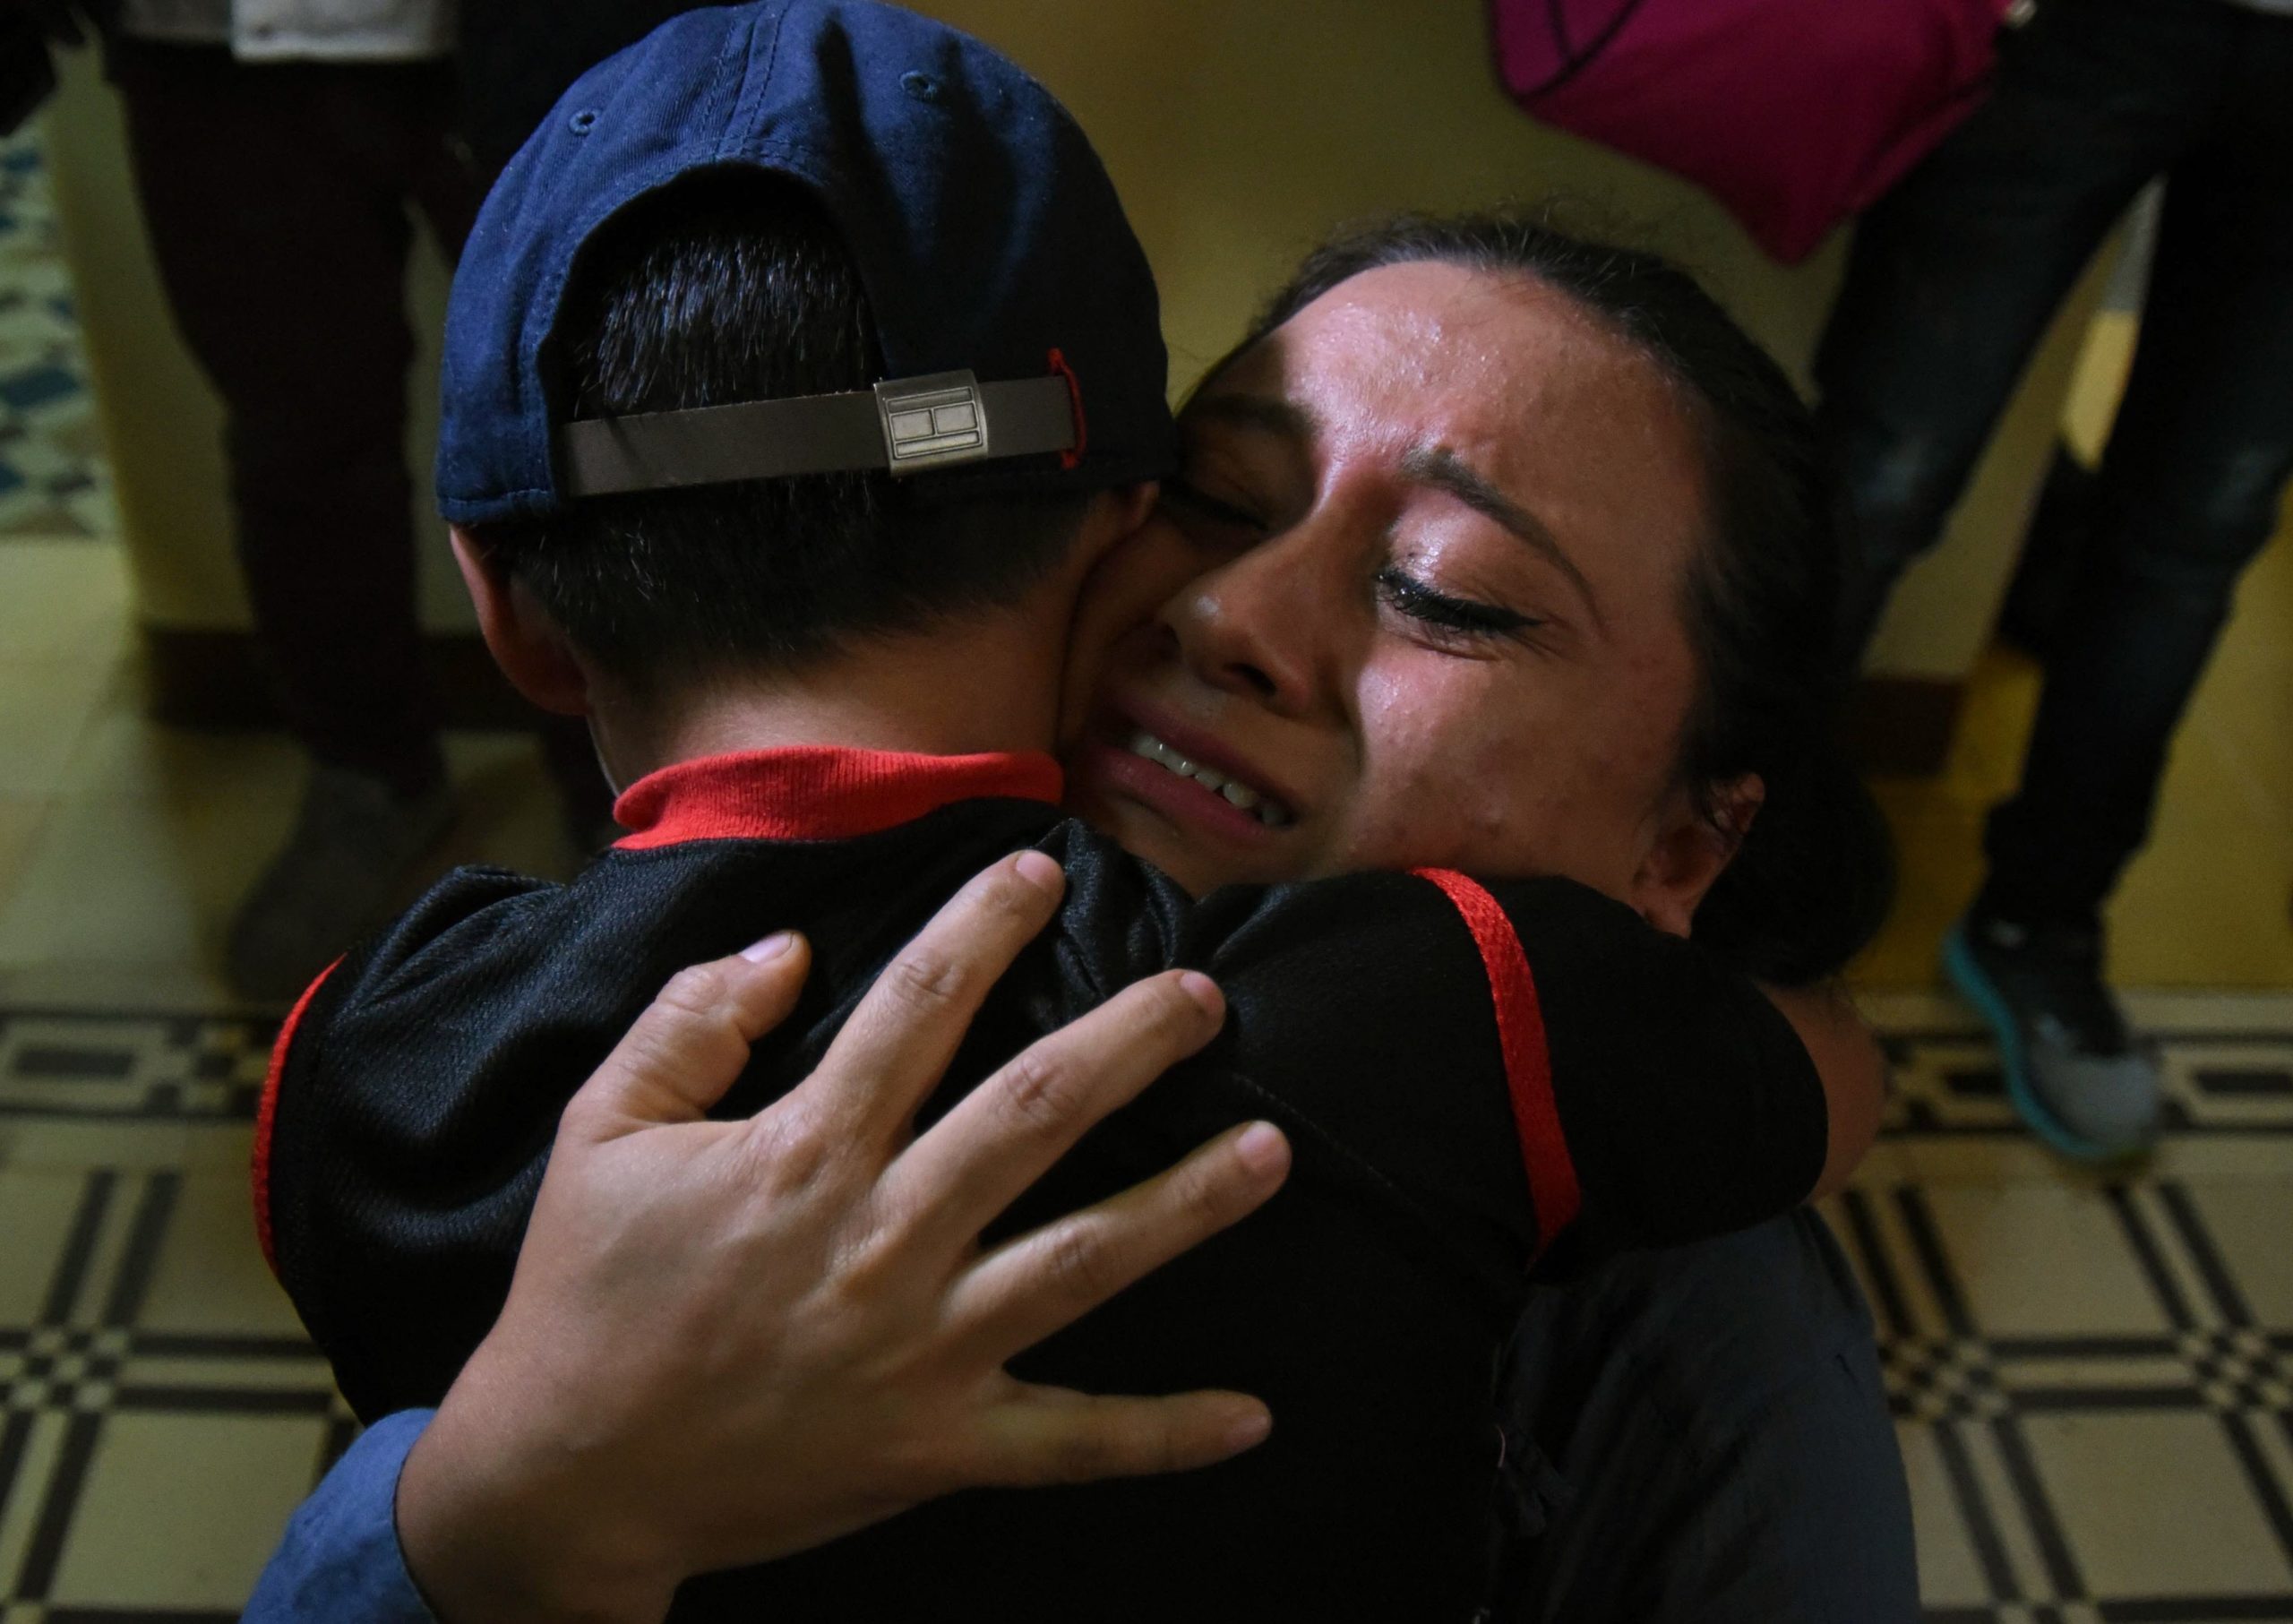 Lourdes de Leon hugs her son Leo -one of three minors who had been separated from their family on the U.S. border- upon arrival at the shelter "Nuestras Raíces" in Guatemala City, on August 7, 2018. (Photo credit should read ORLANDO ESTRADA/AFP via Getty Images)